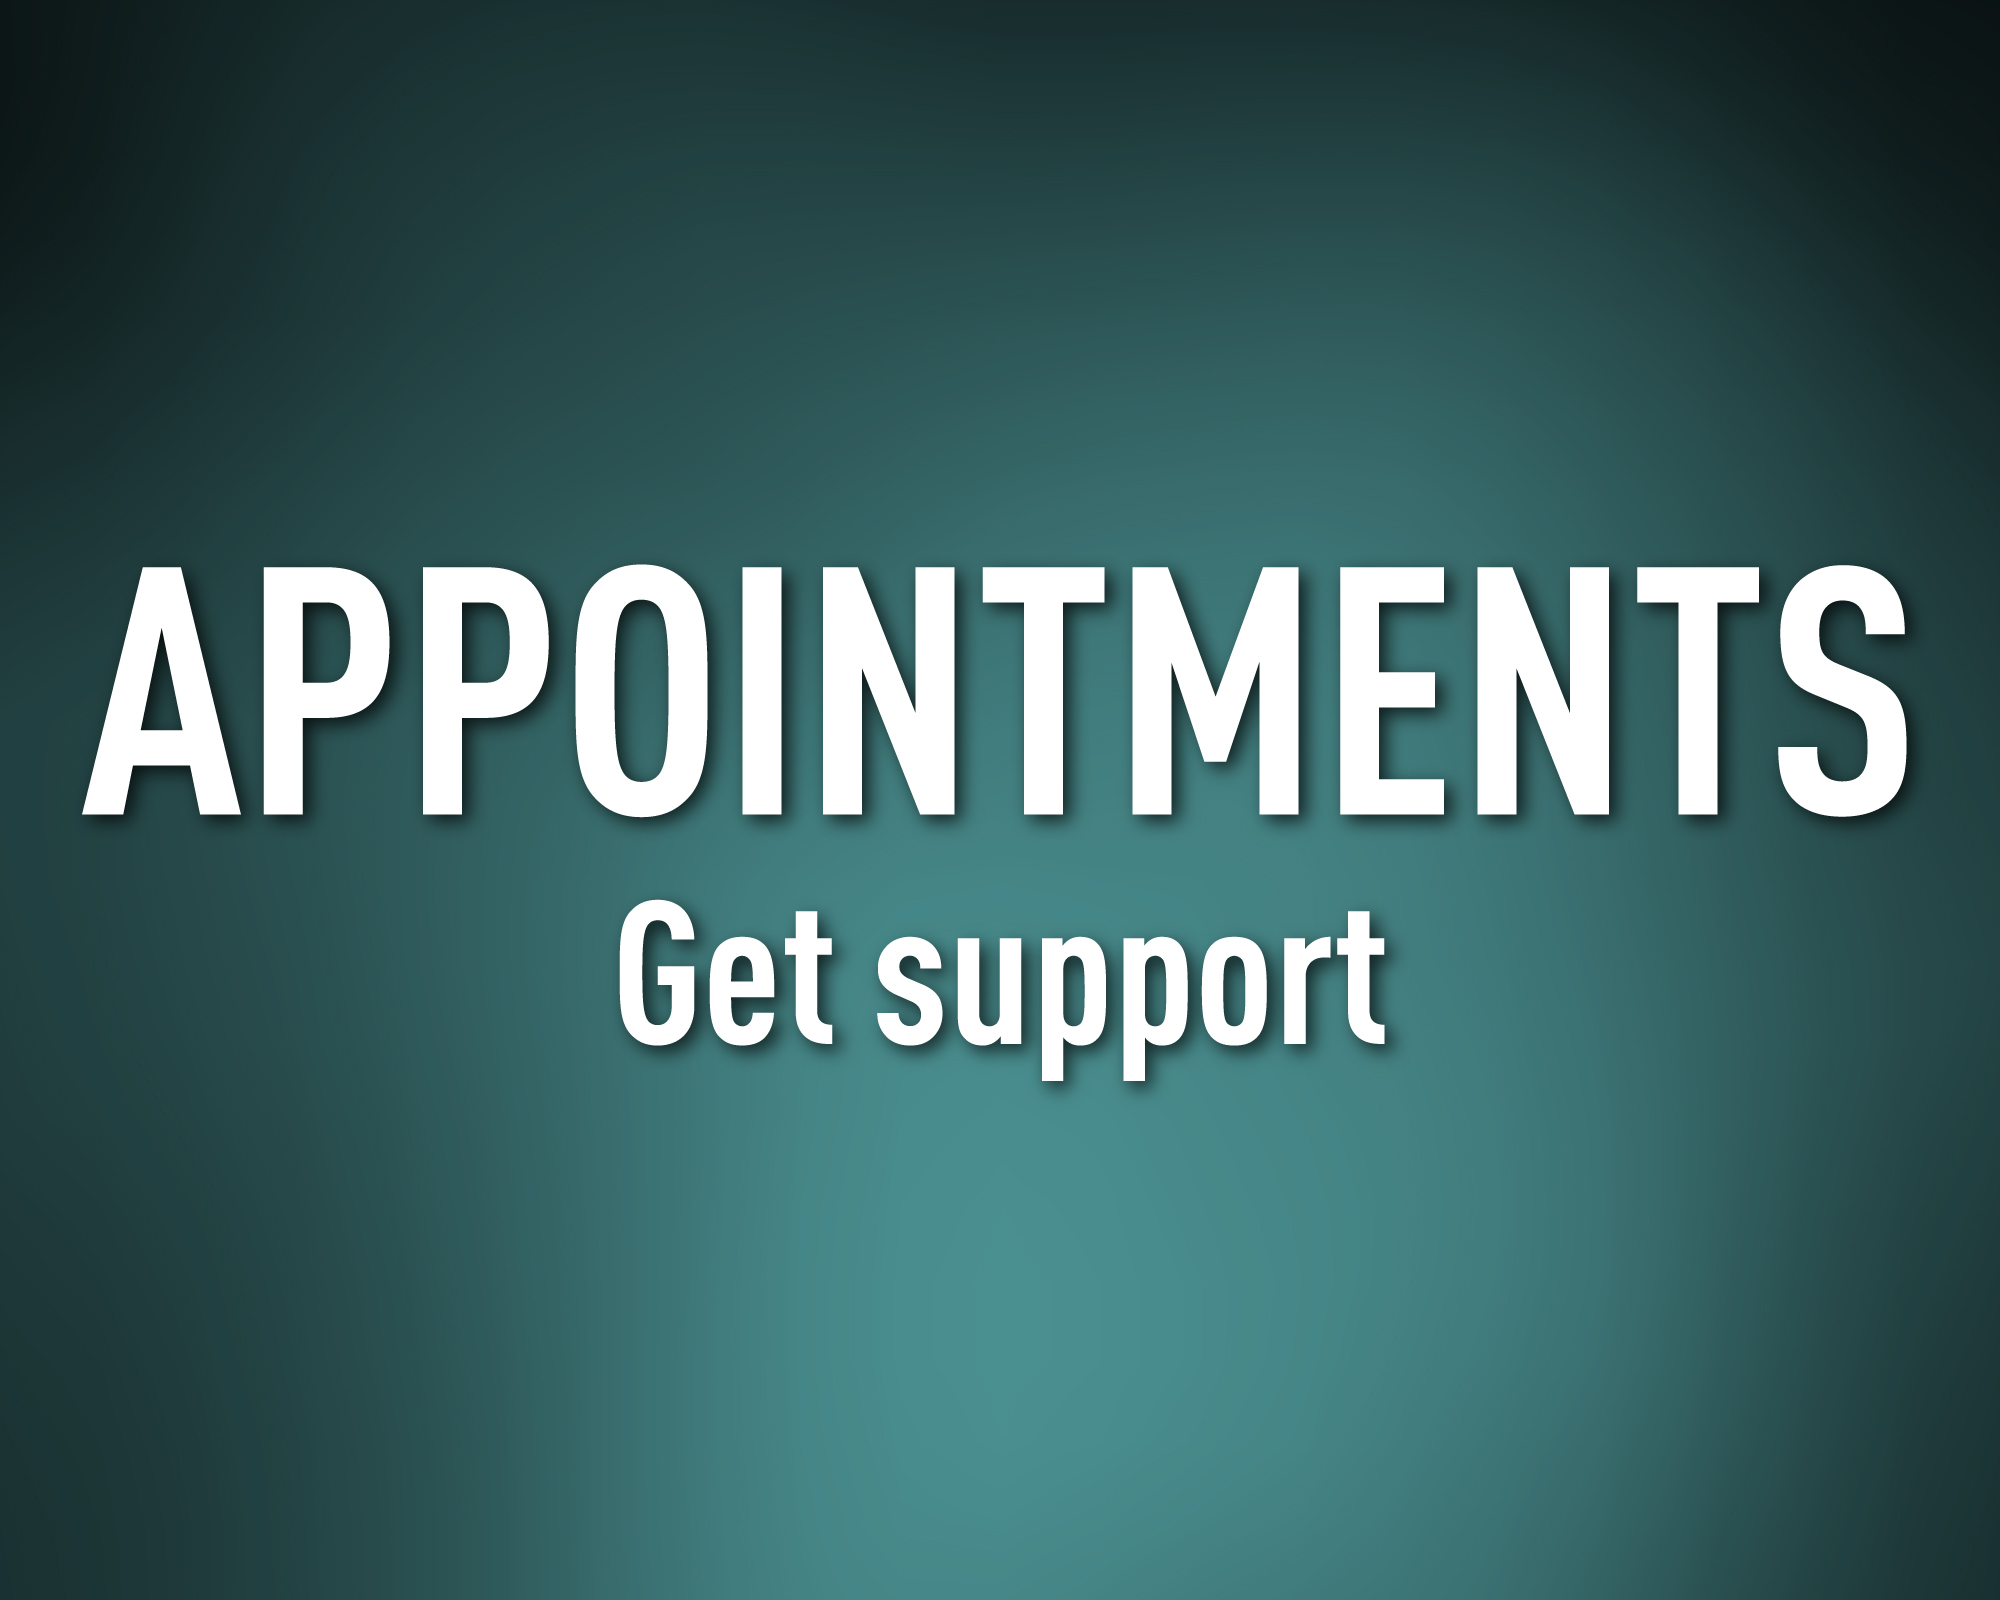 Appointments. Get support